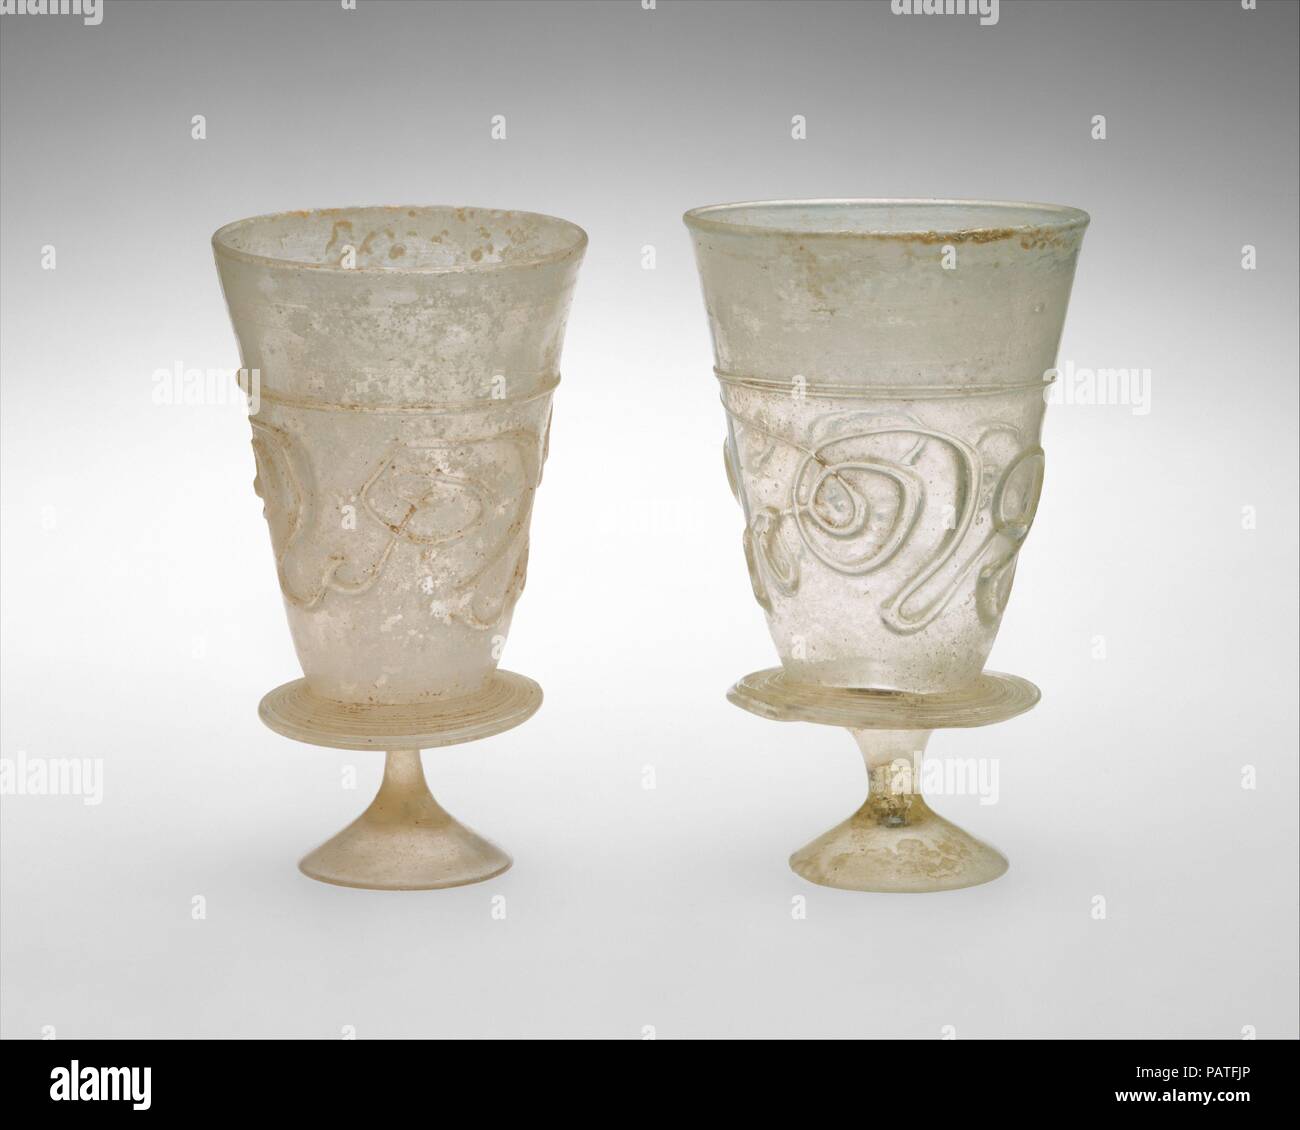 Goblets with Applied Decoration. Date: 11th-early 12th century.  These matcing goblets are each formed by a conical cup attached to a small, solid, and splayed stemmed foot by a circular flange applied around the base of the cup. They are made of yellowish colorless glass that contains many small bubbles. Both cups are decorated with an unbroken applied trail in the same yellowish color, which forms a horizontal line about two-thirds of the height and continues below to create a fanciful, abstract pattern of curly designs around the cup. The decoration can be read more clearly when the cup is  Stock Photo